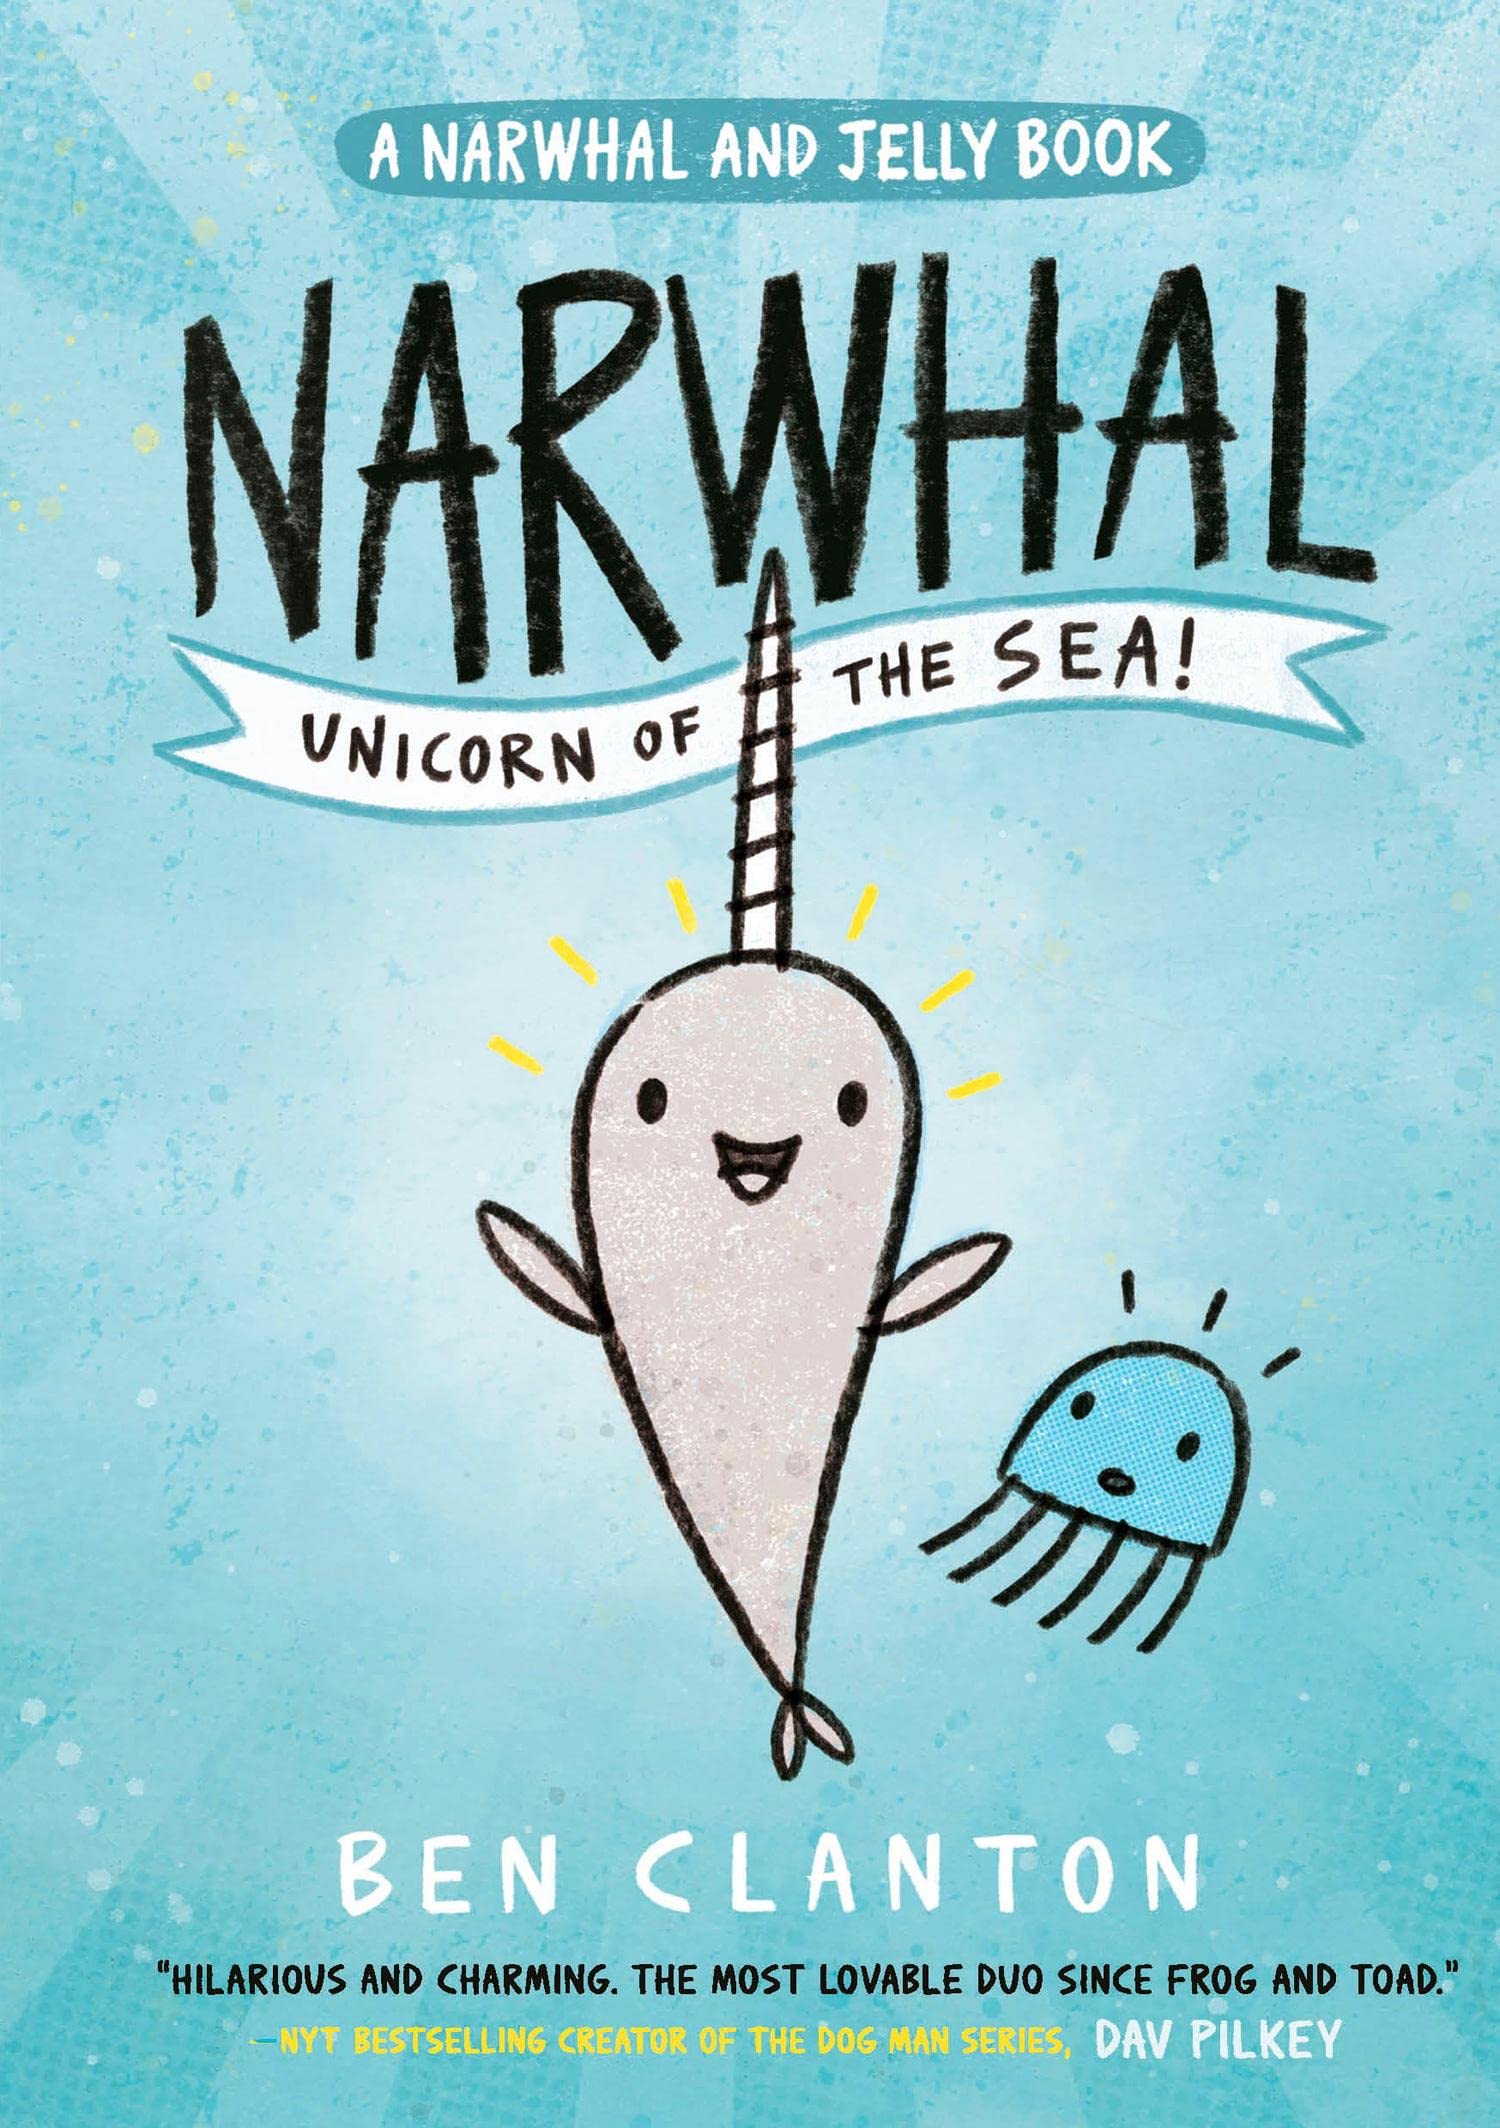 Image of the book "Narwhal, Unicorn of the Sea" by Ben Clant on a blue background and a cartoon drawn narwhal.